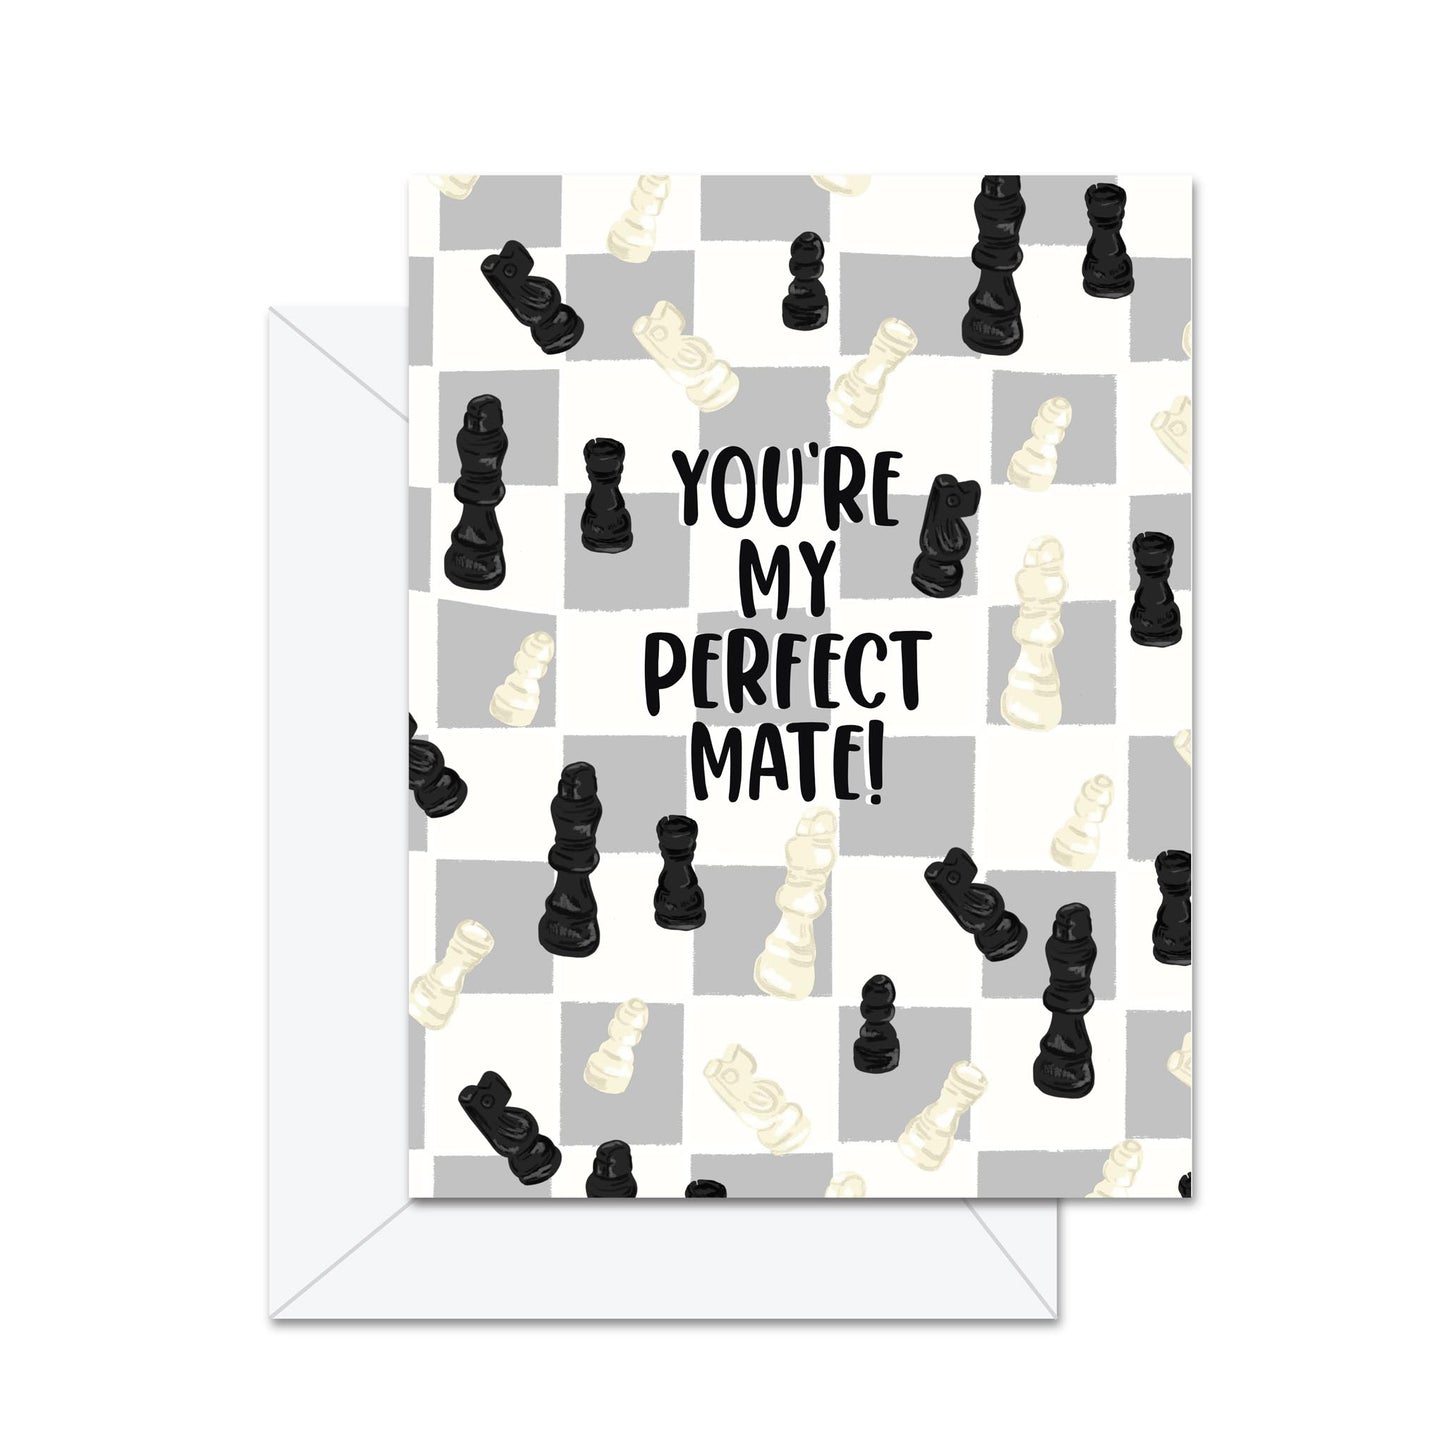 You're My Perfect Mate! - Greeting Card